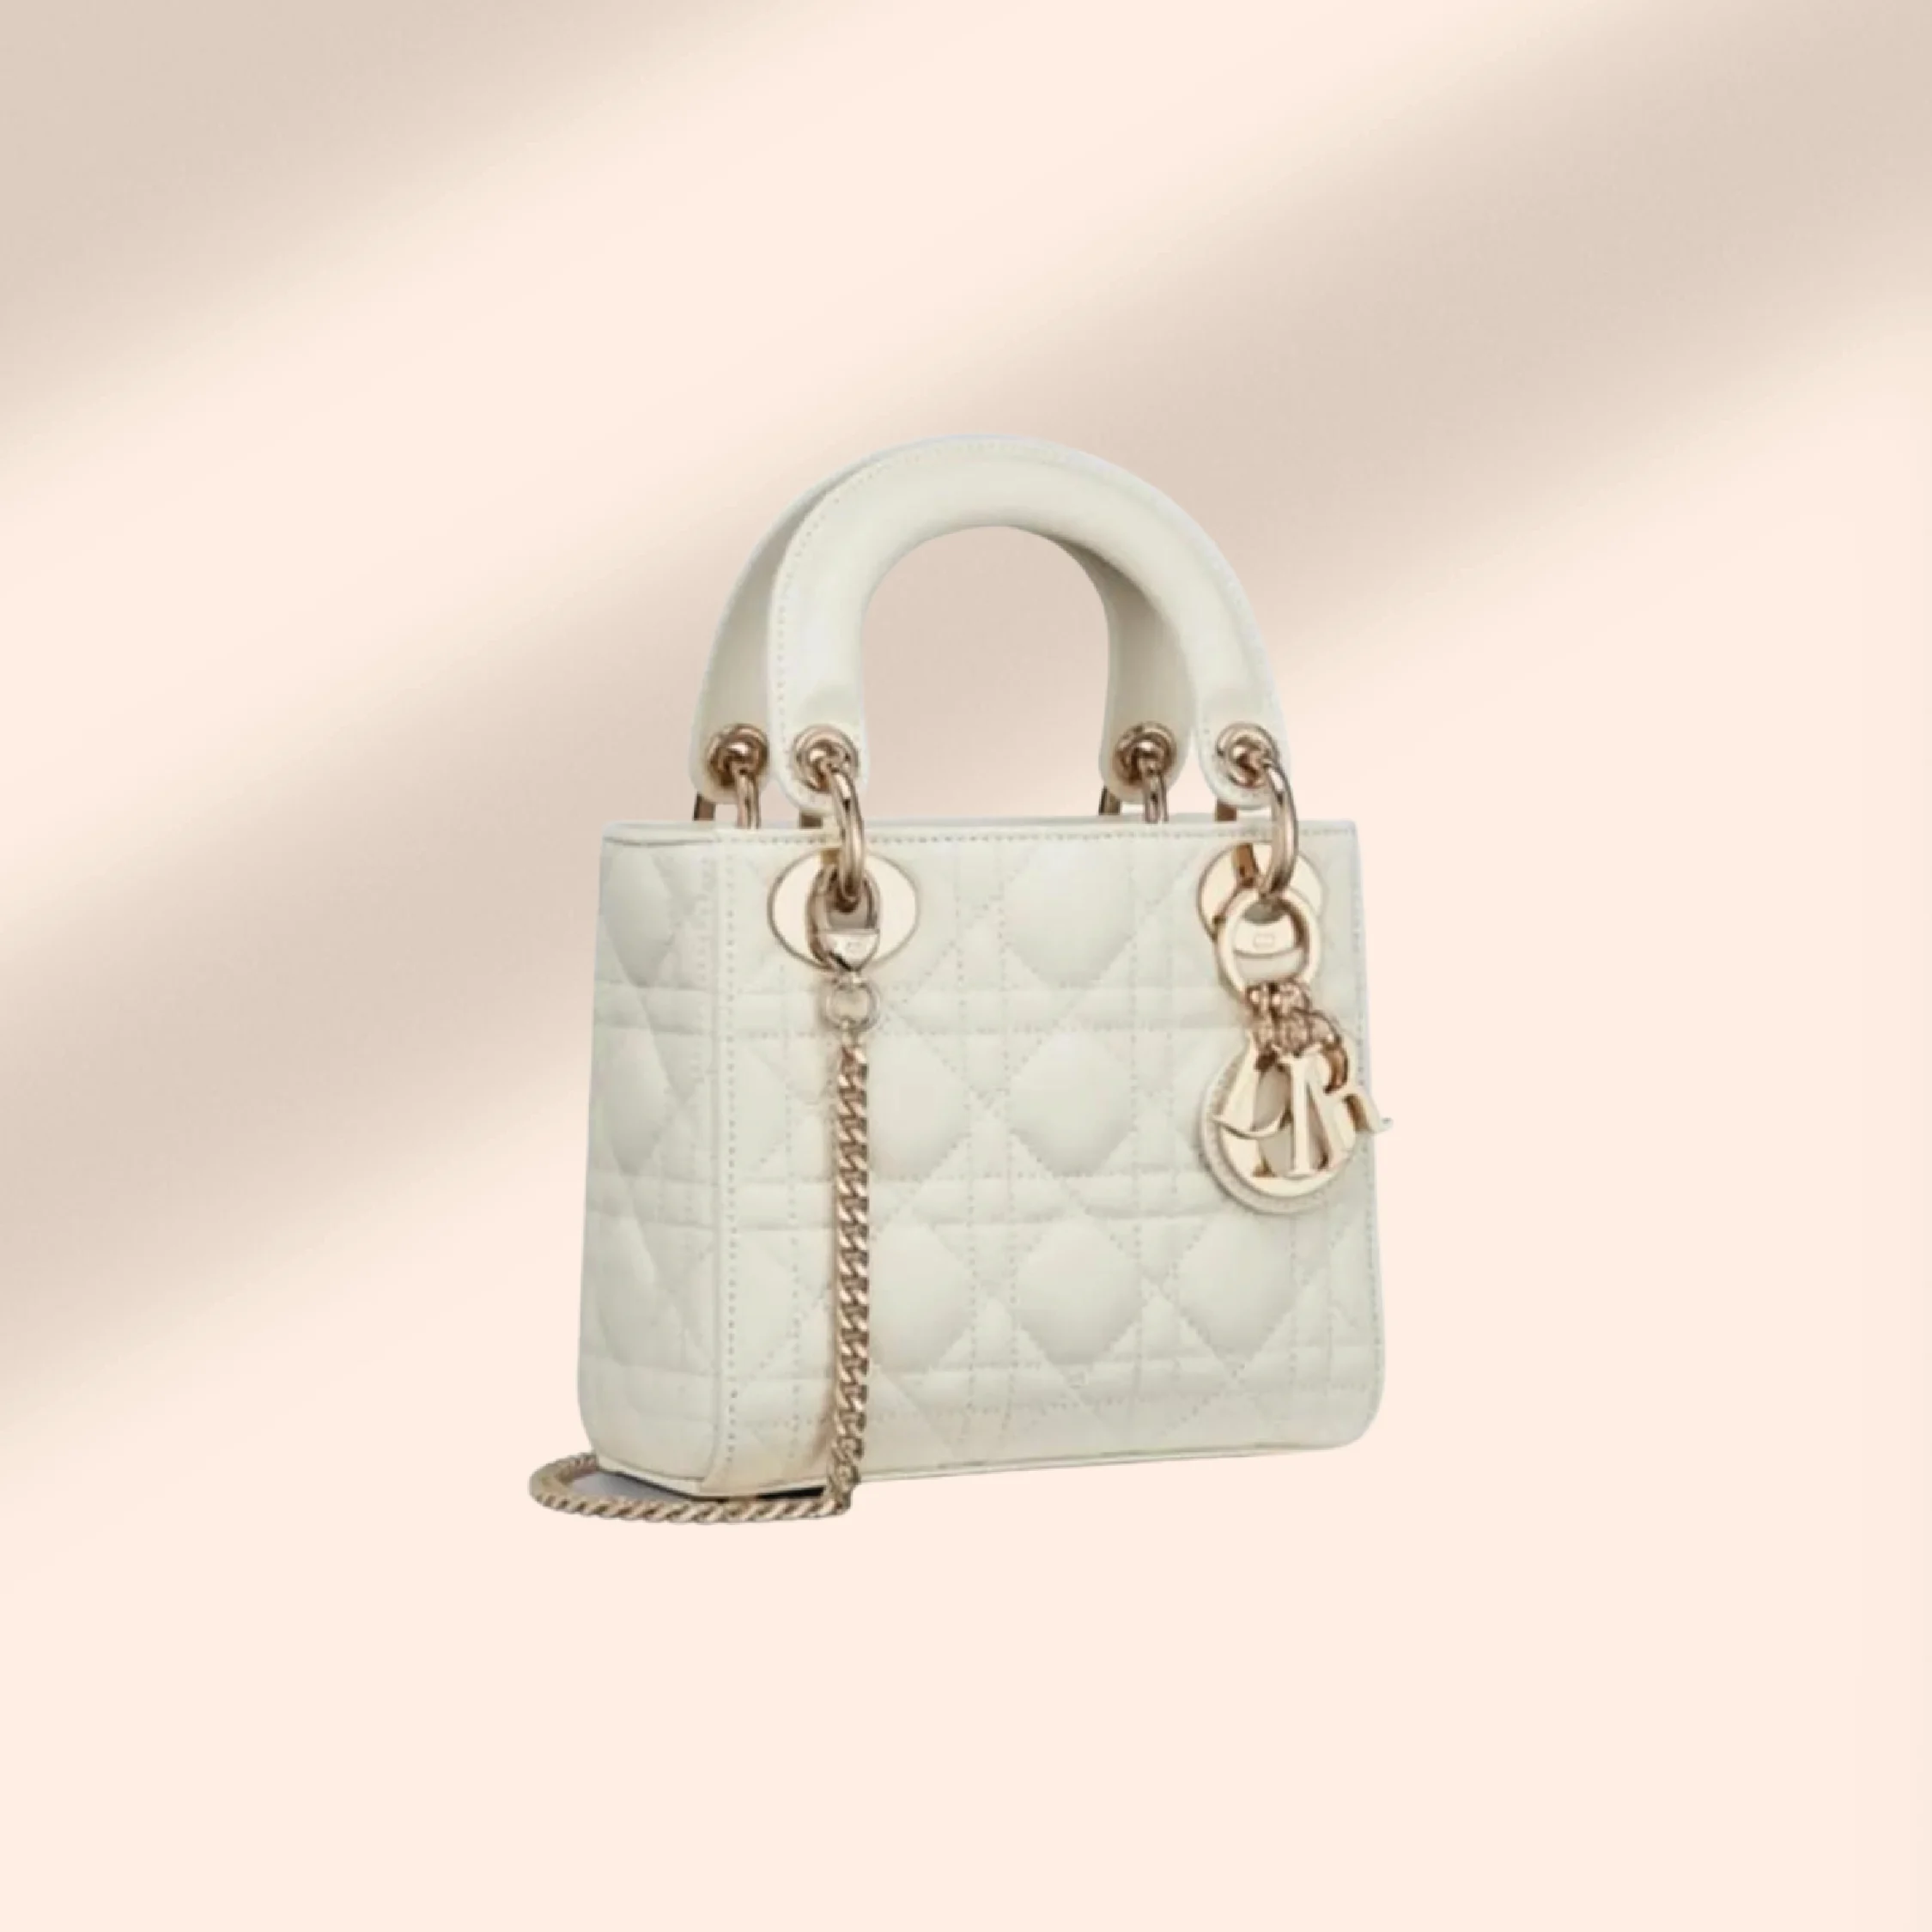 Mini Lady Dior Bag in Latte for hire.